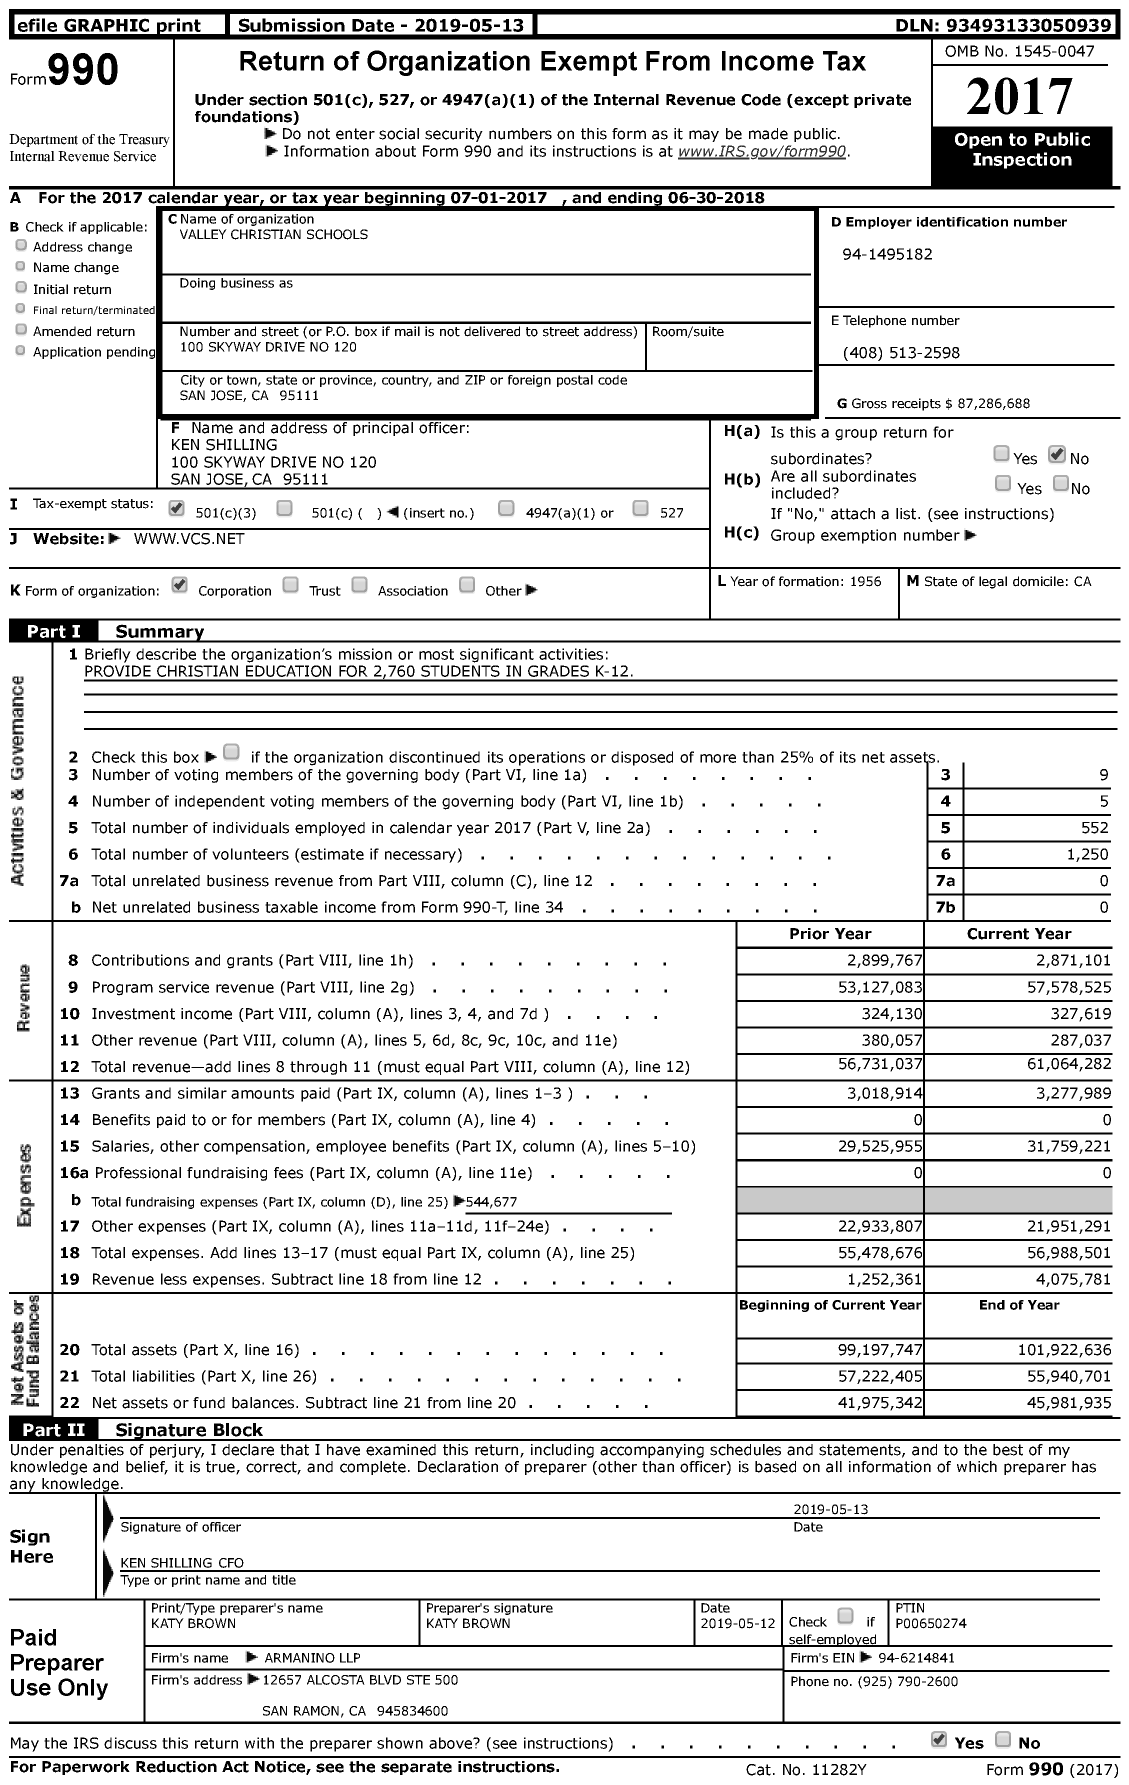 Image of first page of 2017 Form 990 for Valley Christian Schools (VCS)